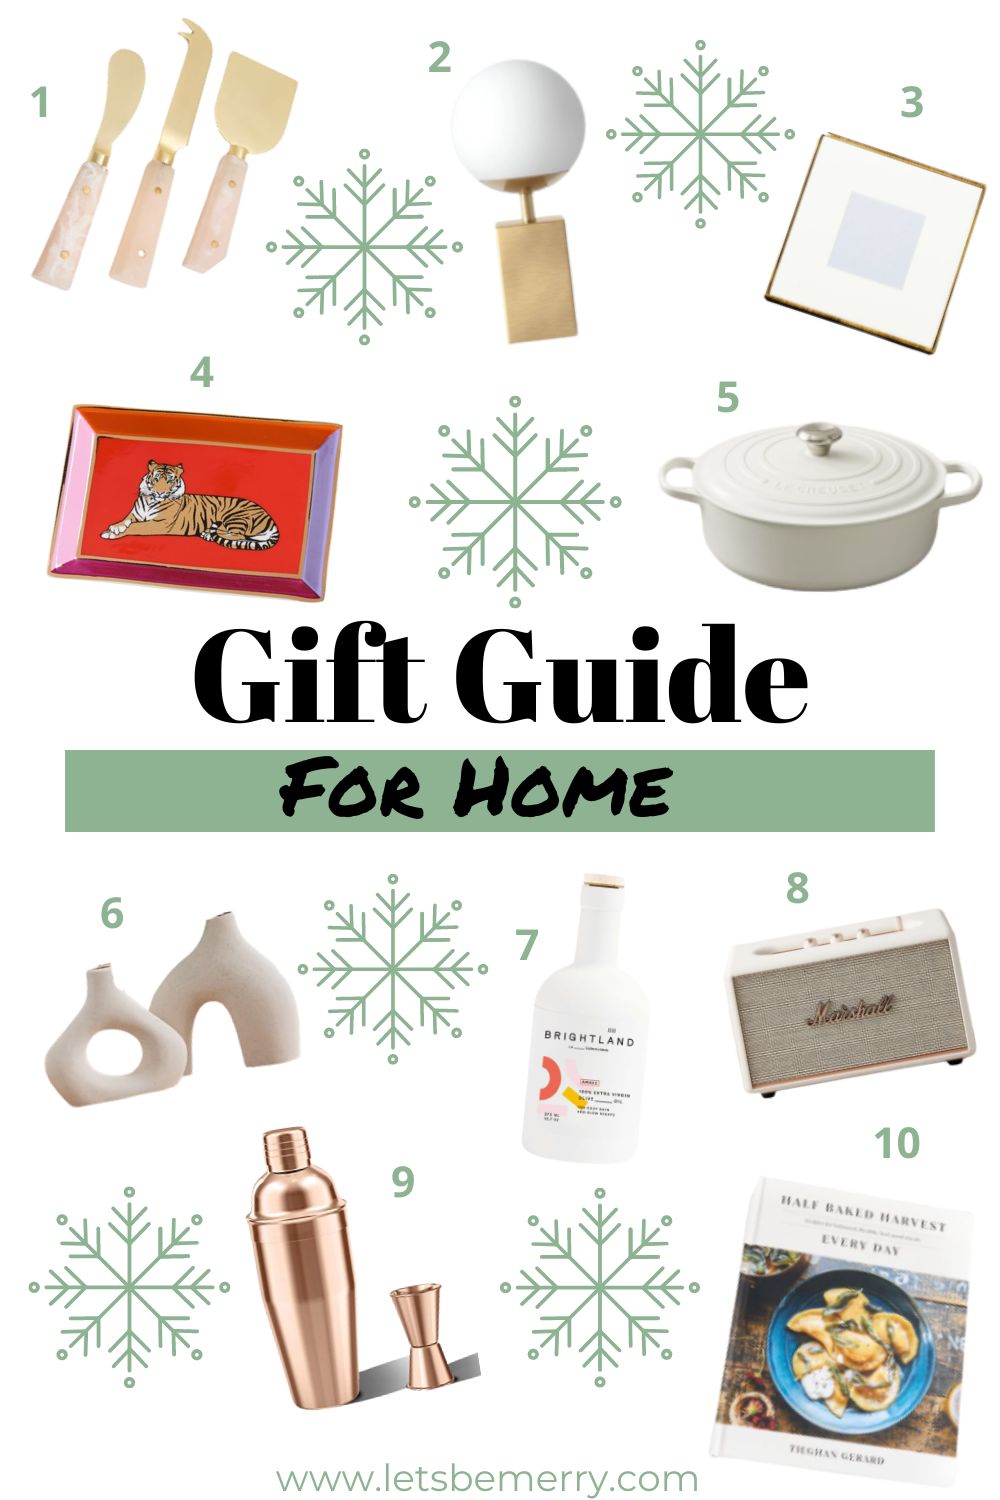 https://letsbemerry.com/wp-content/uploads/2022/12/2022-holiday-Gift-Guide-for-home.jpg